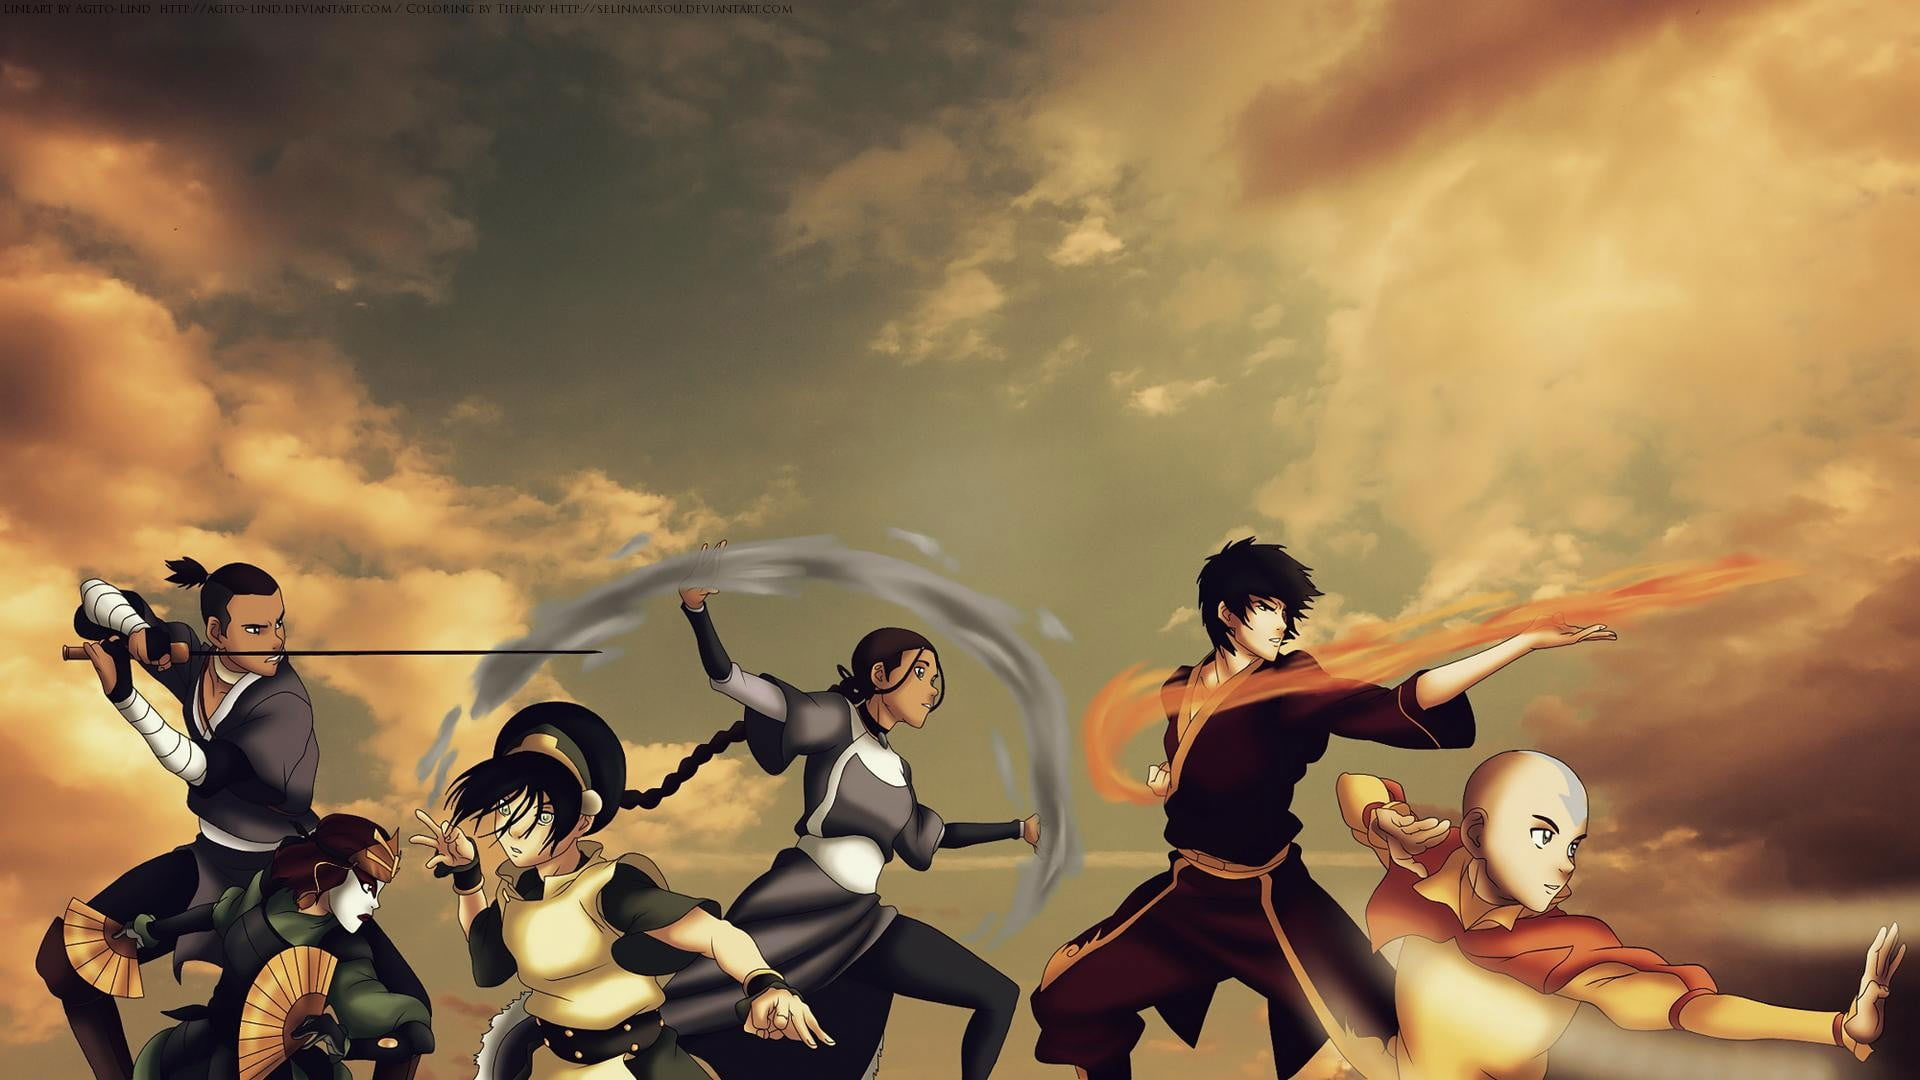 Wallpaper Anime Characters Illustration, Avatar The Last Airbender